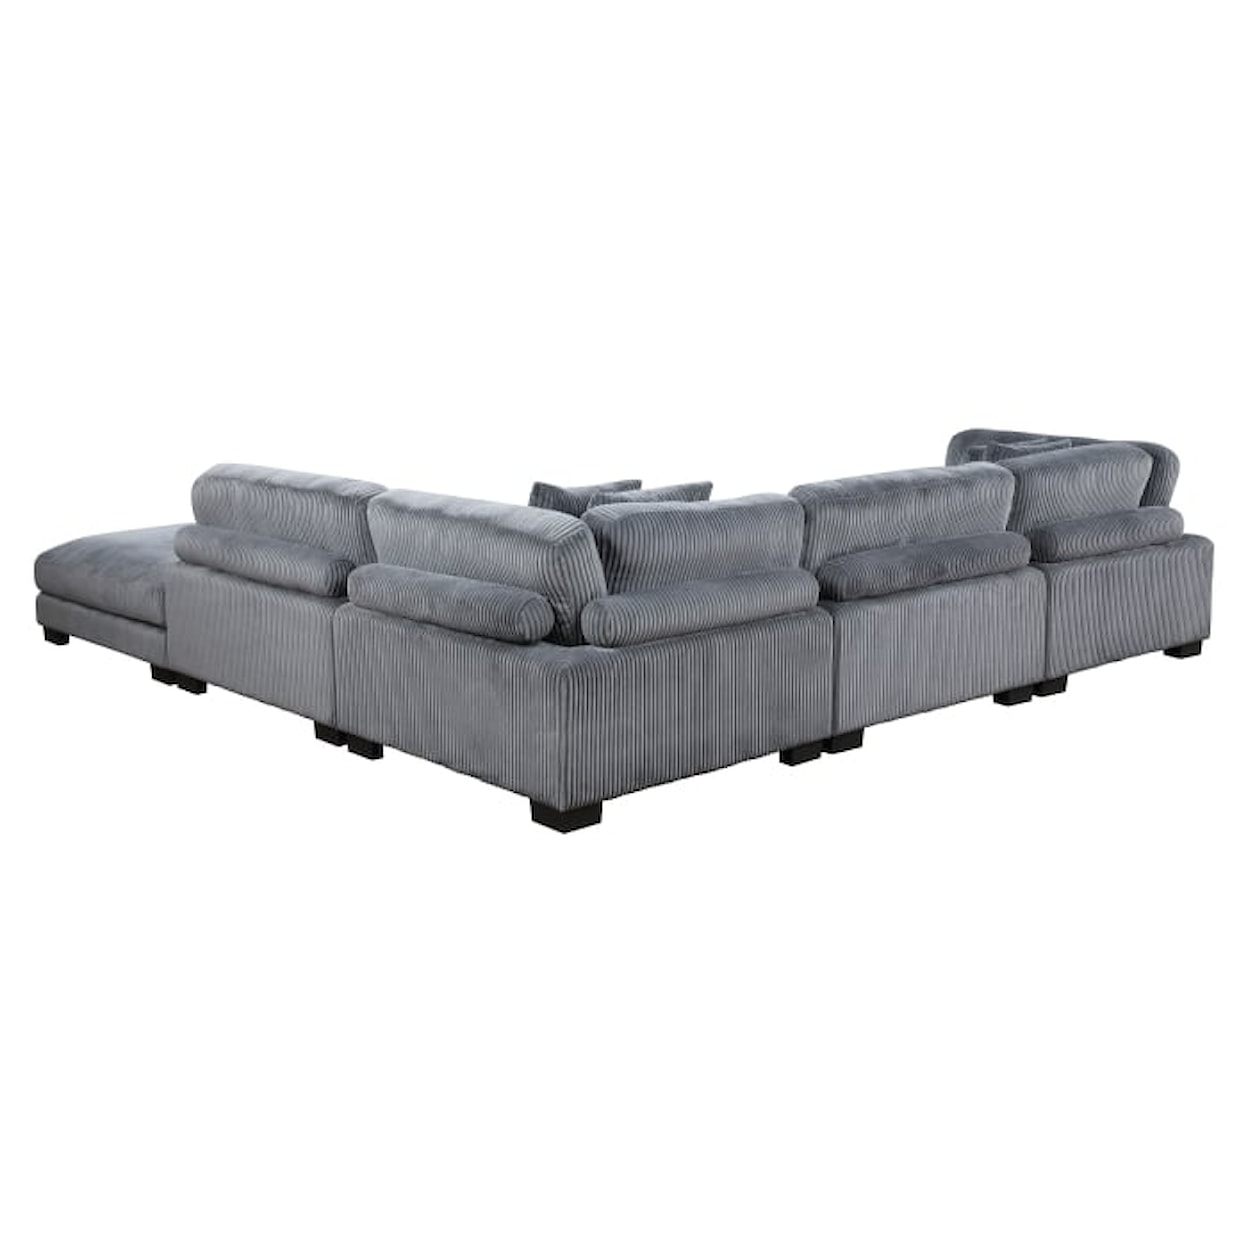 Homelegance Furniture Traverse 5-Piece Modular Sectional with Ottoman